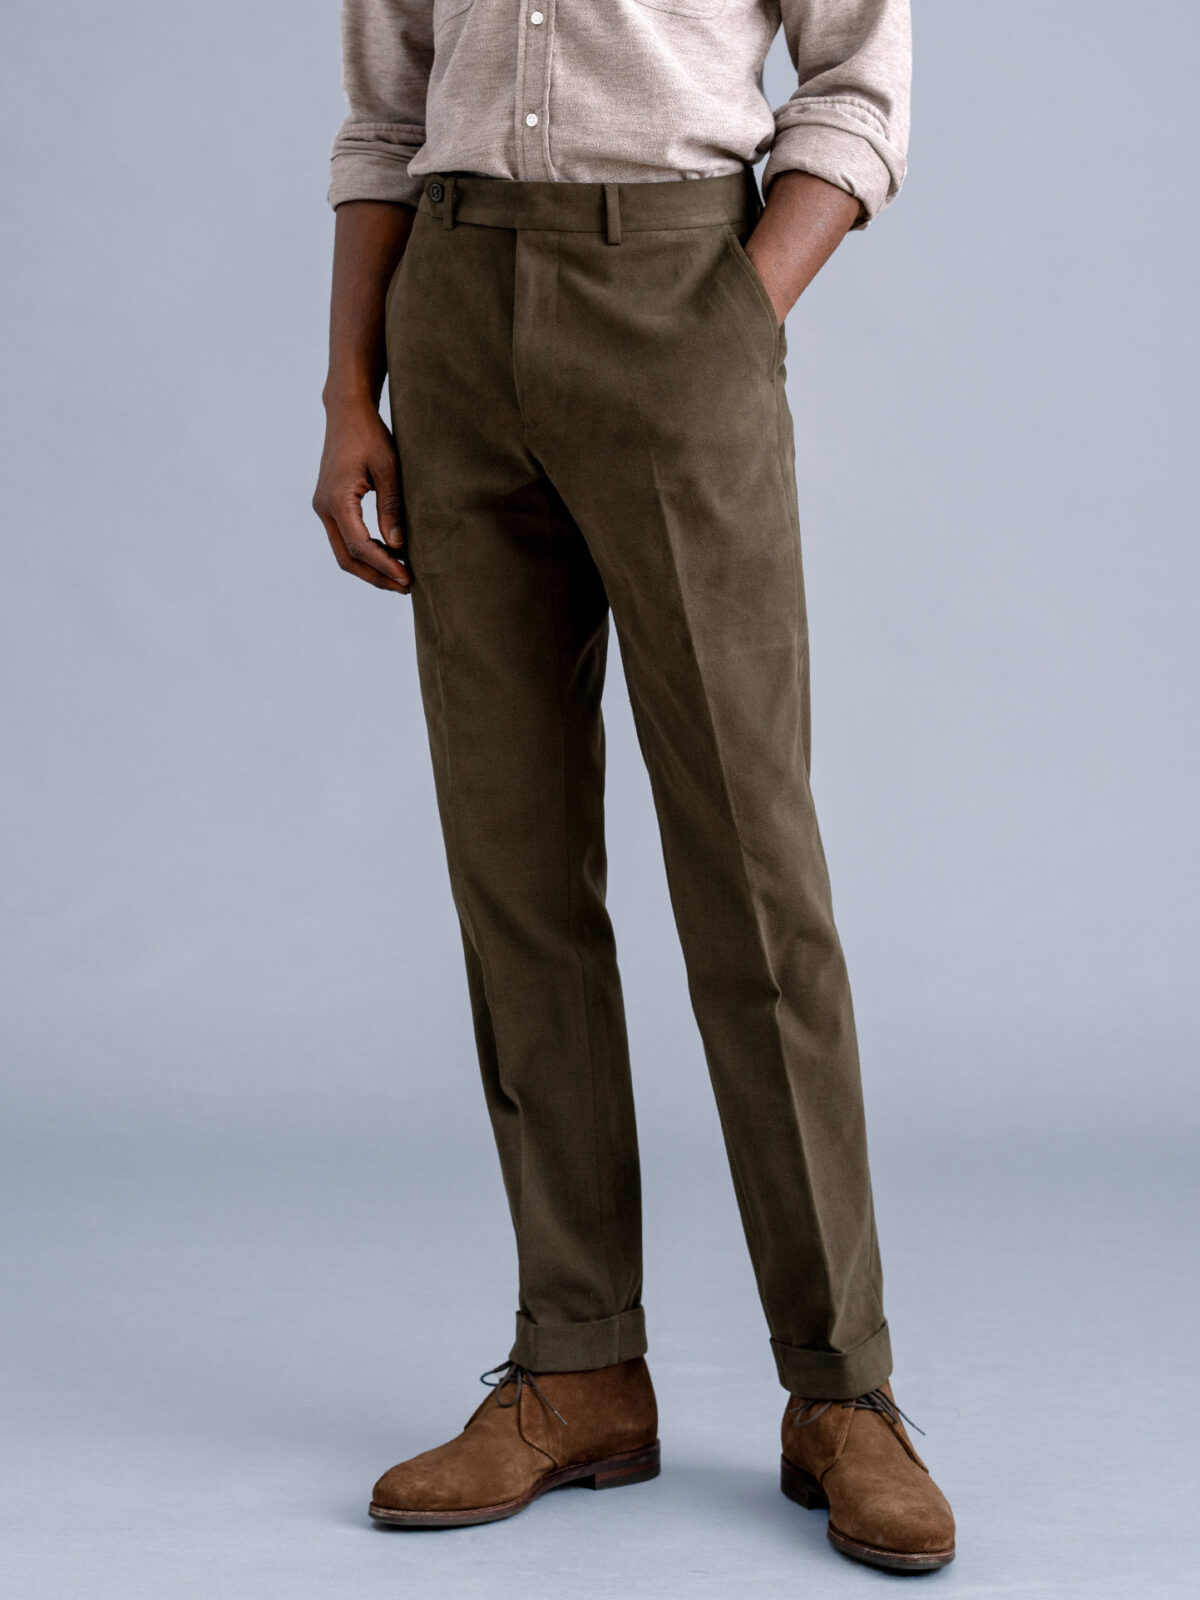 Oxford Formal Wear Cotton Trousers Full Pant For Men, Light Brown